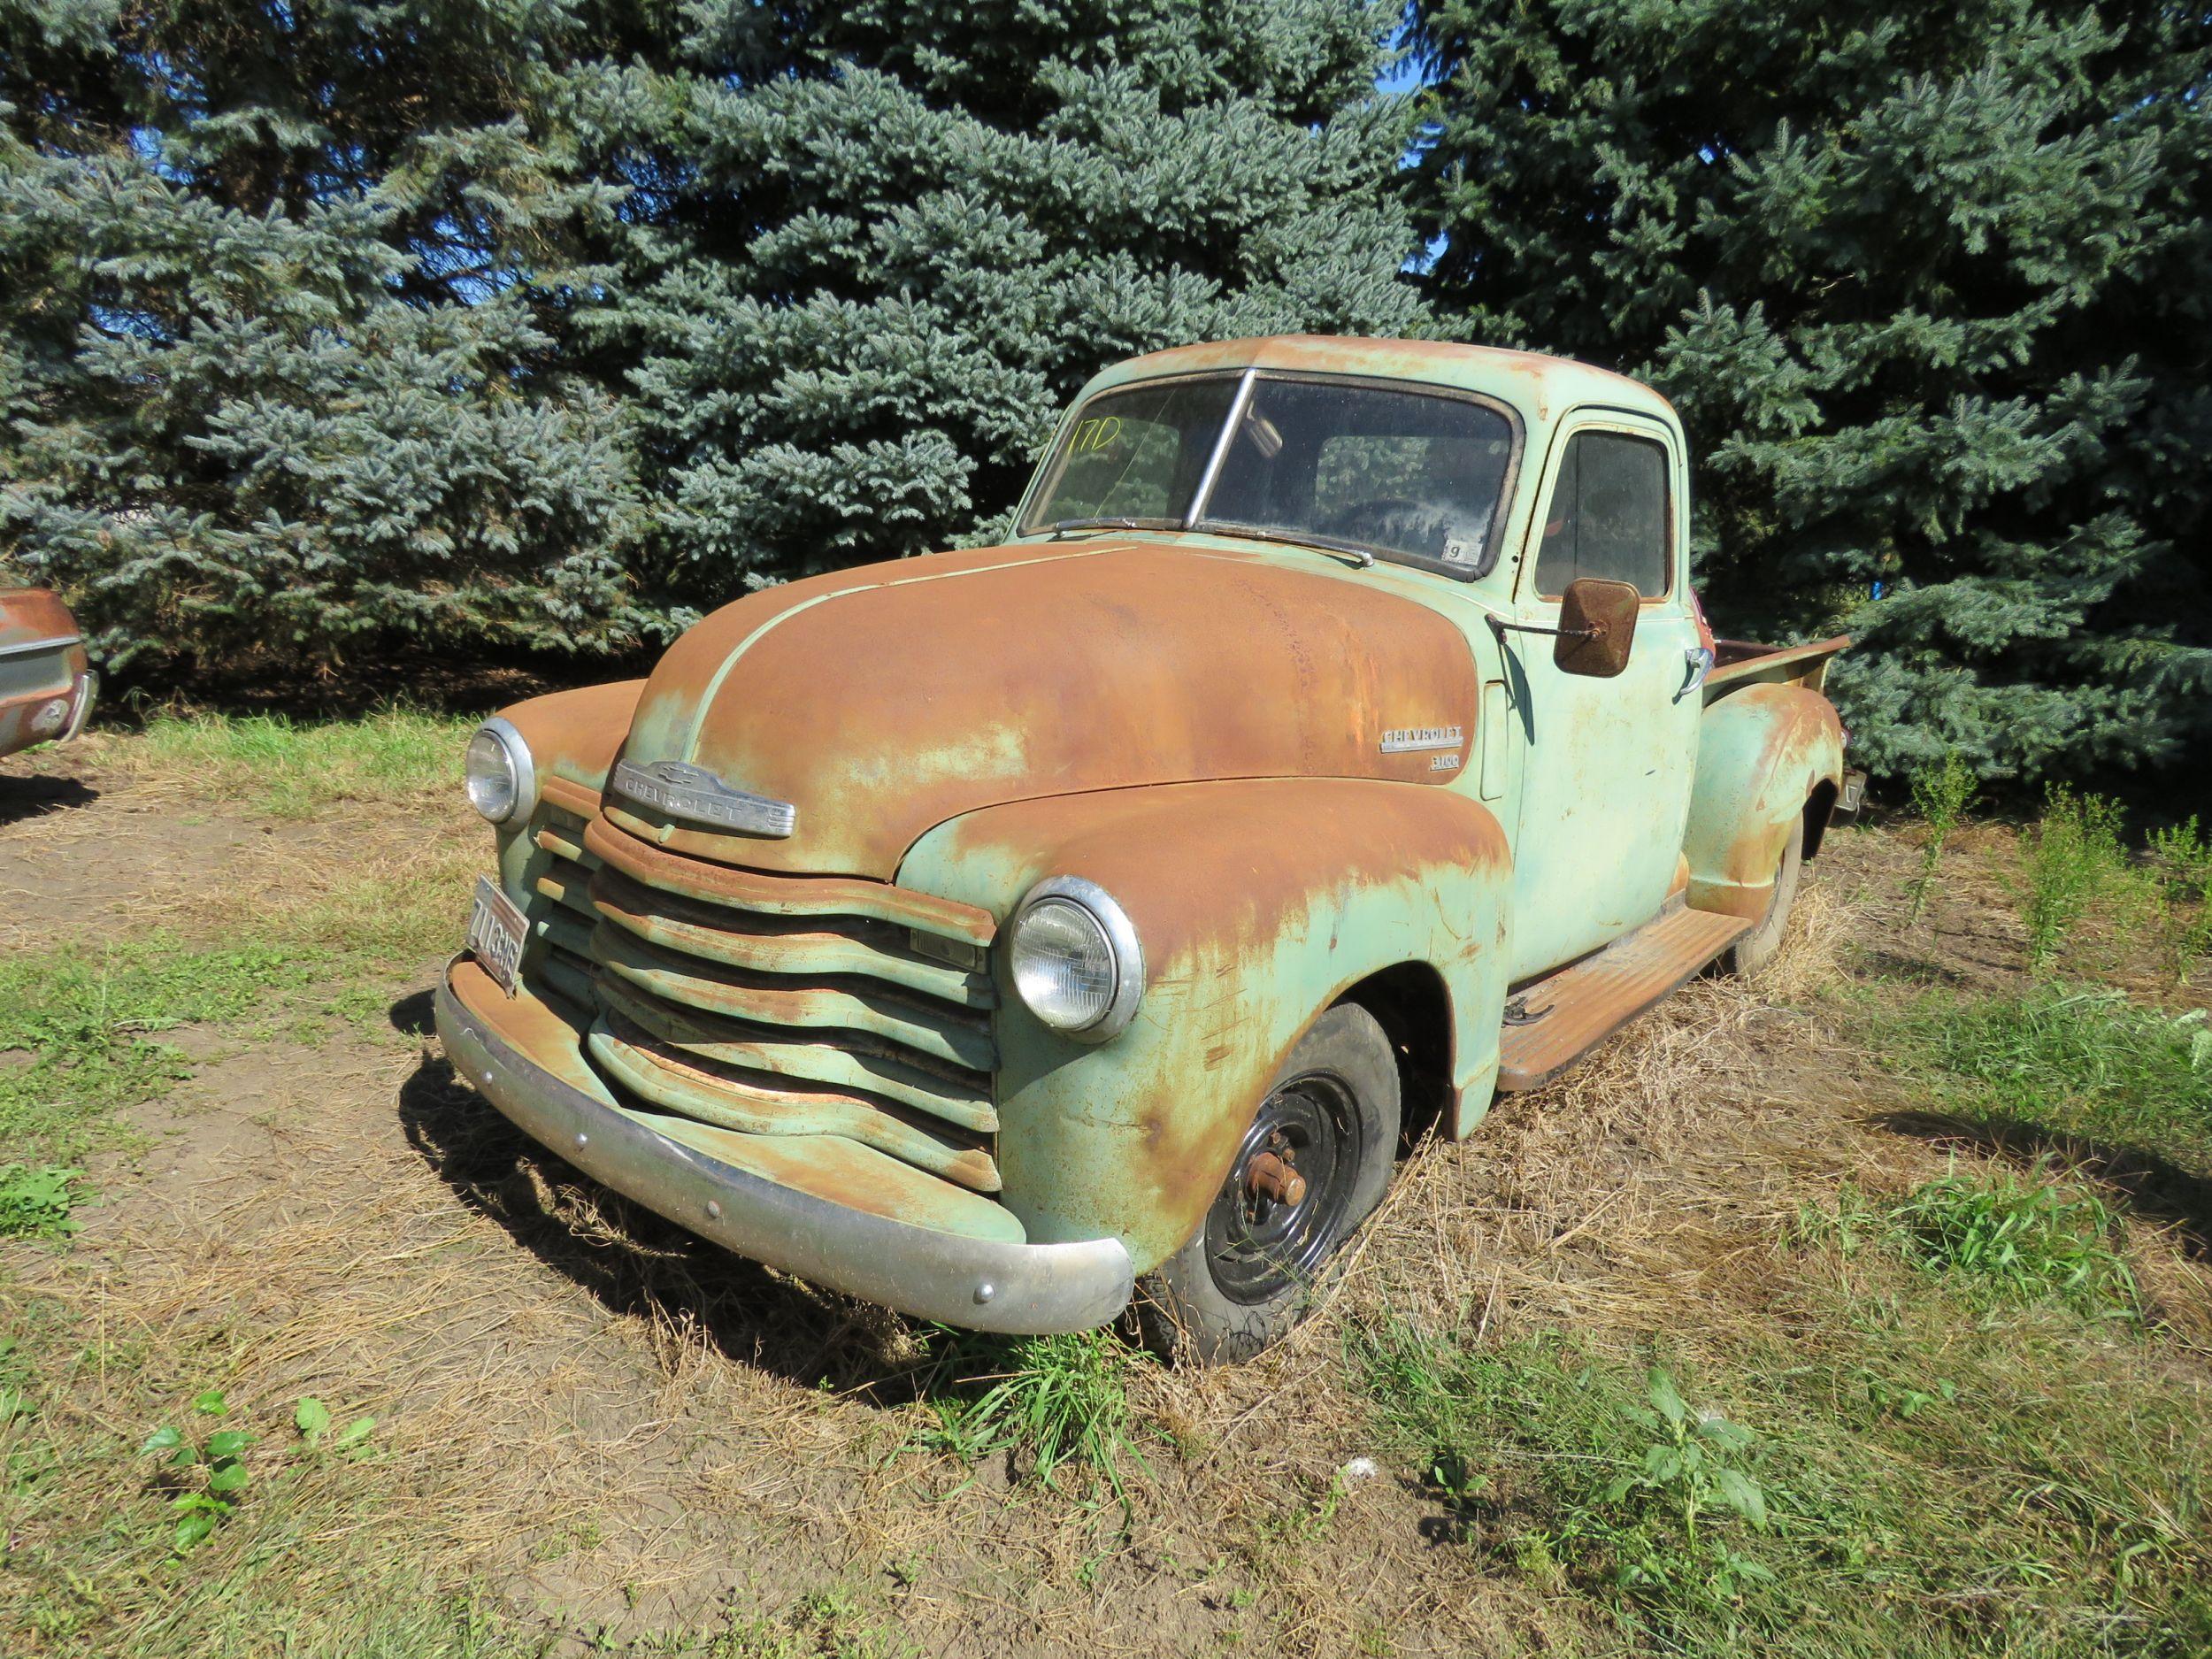 1950 Chevrolet 3100 Series Pickup for Rod or Restore